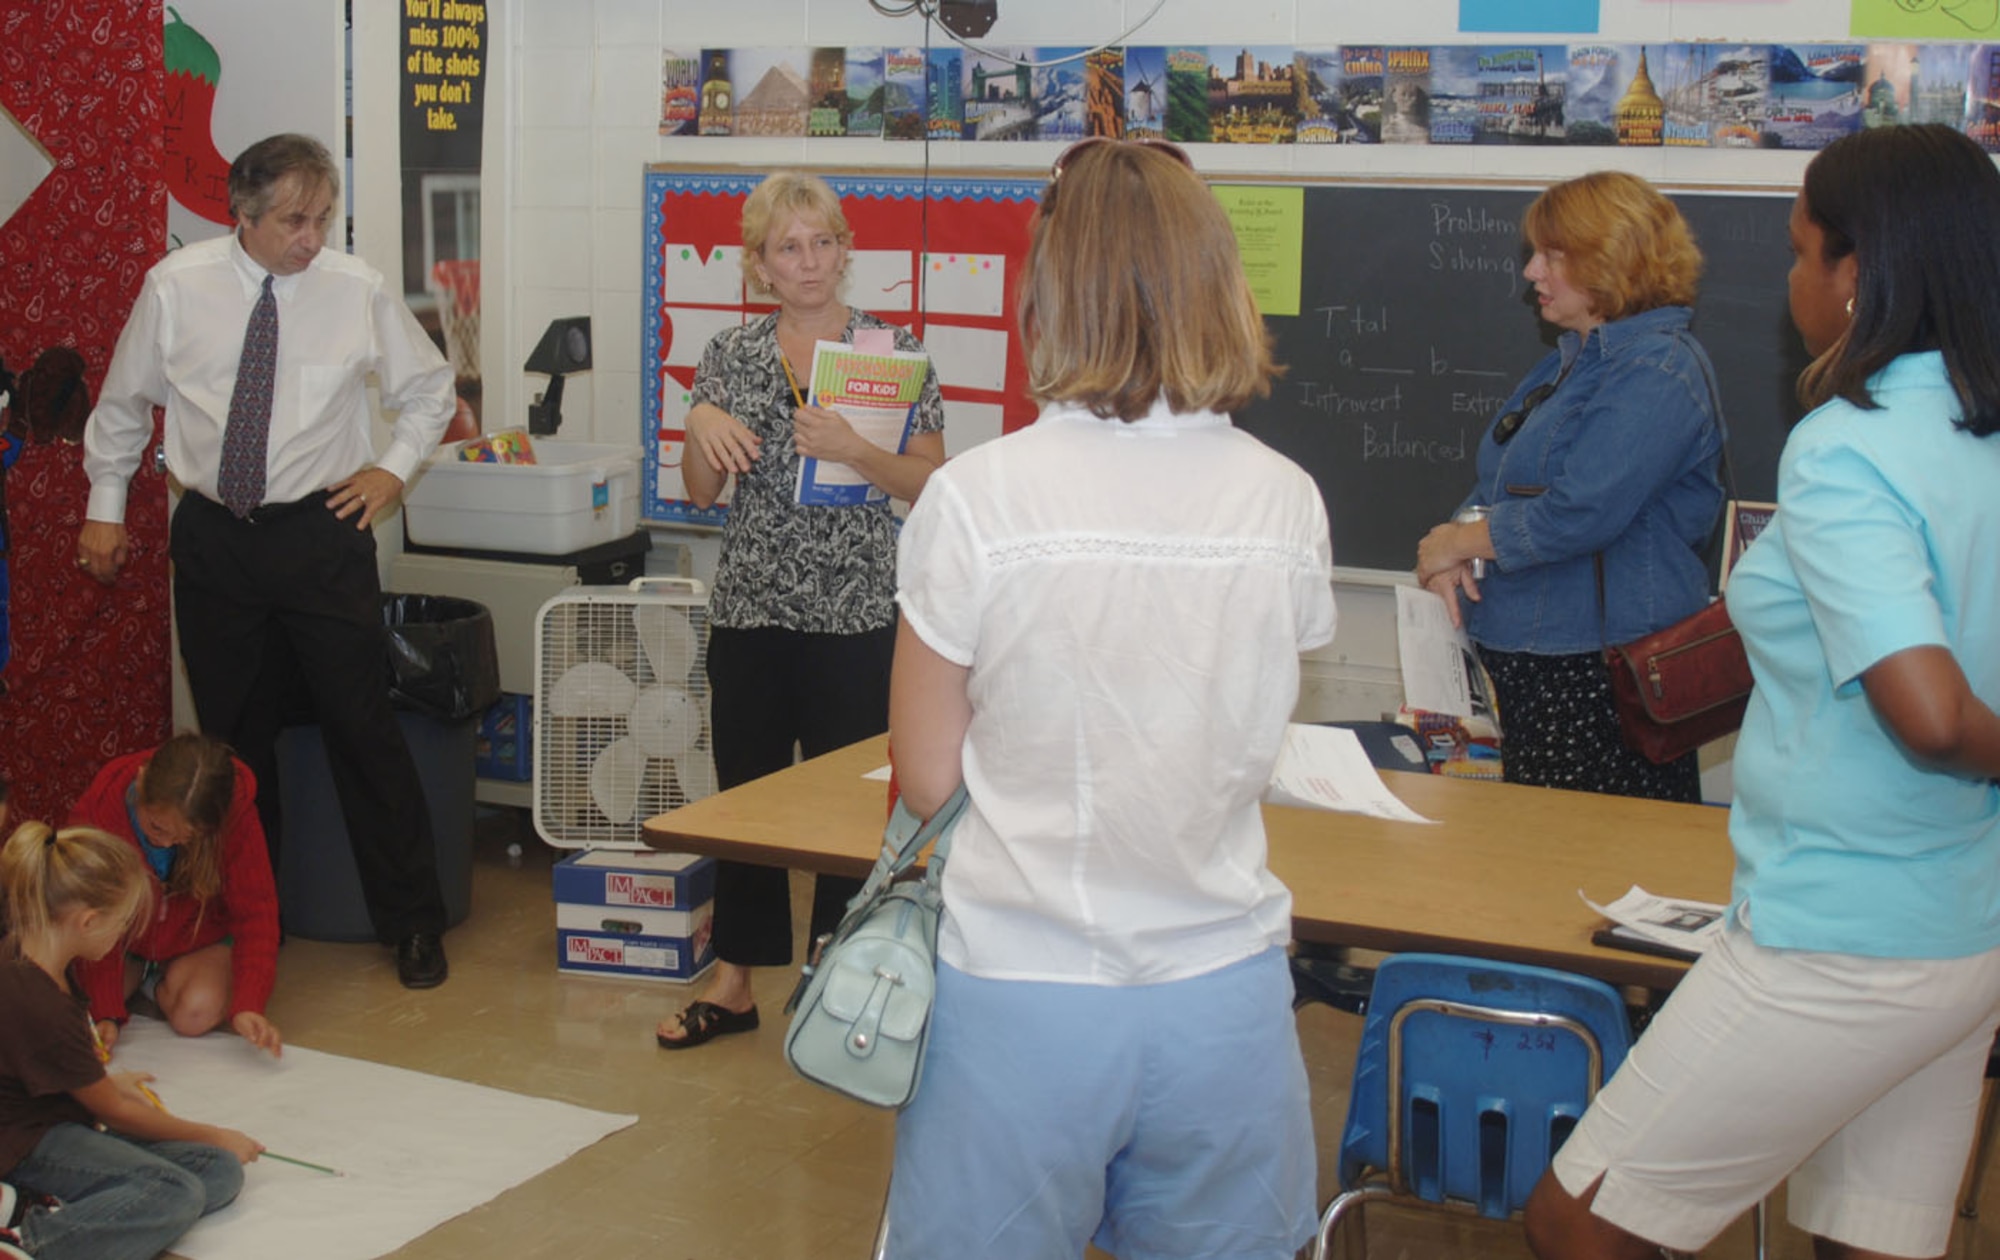 Parents of base children toured Caledonia Elementary, Middle and High schools Aug. 20 to help the make an informed decision on their school choice options at the Caledonia campus. (U.S. Air Force photo by Senior Airman John Parie)